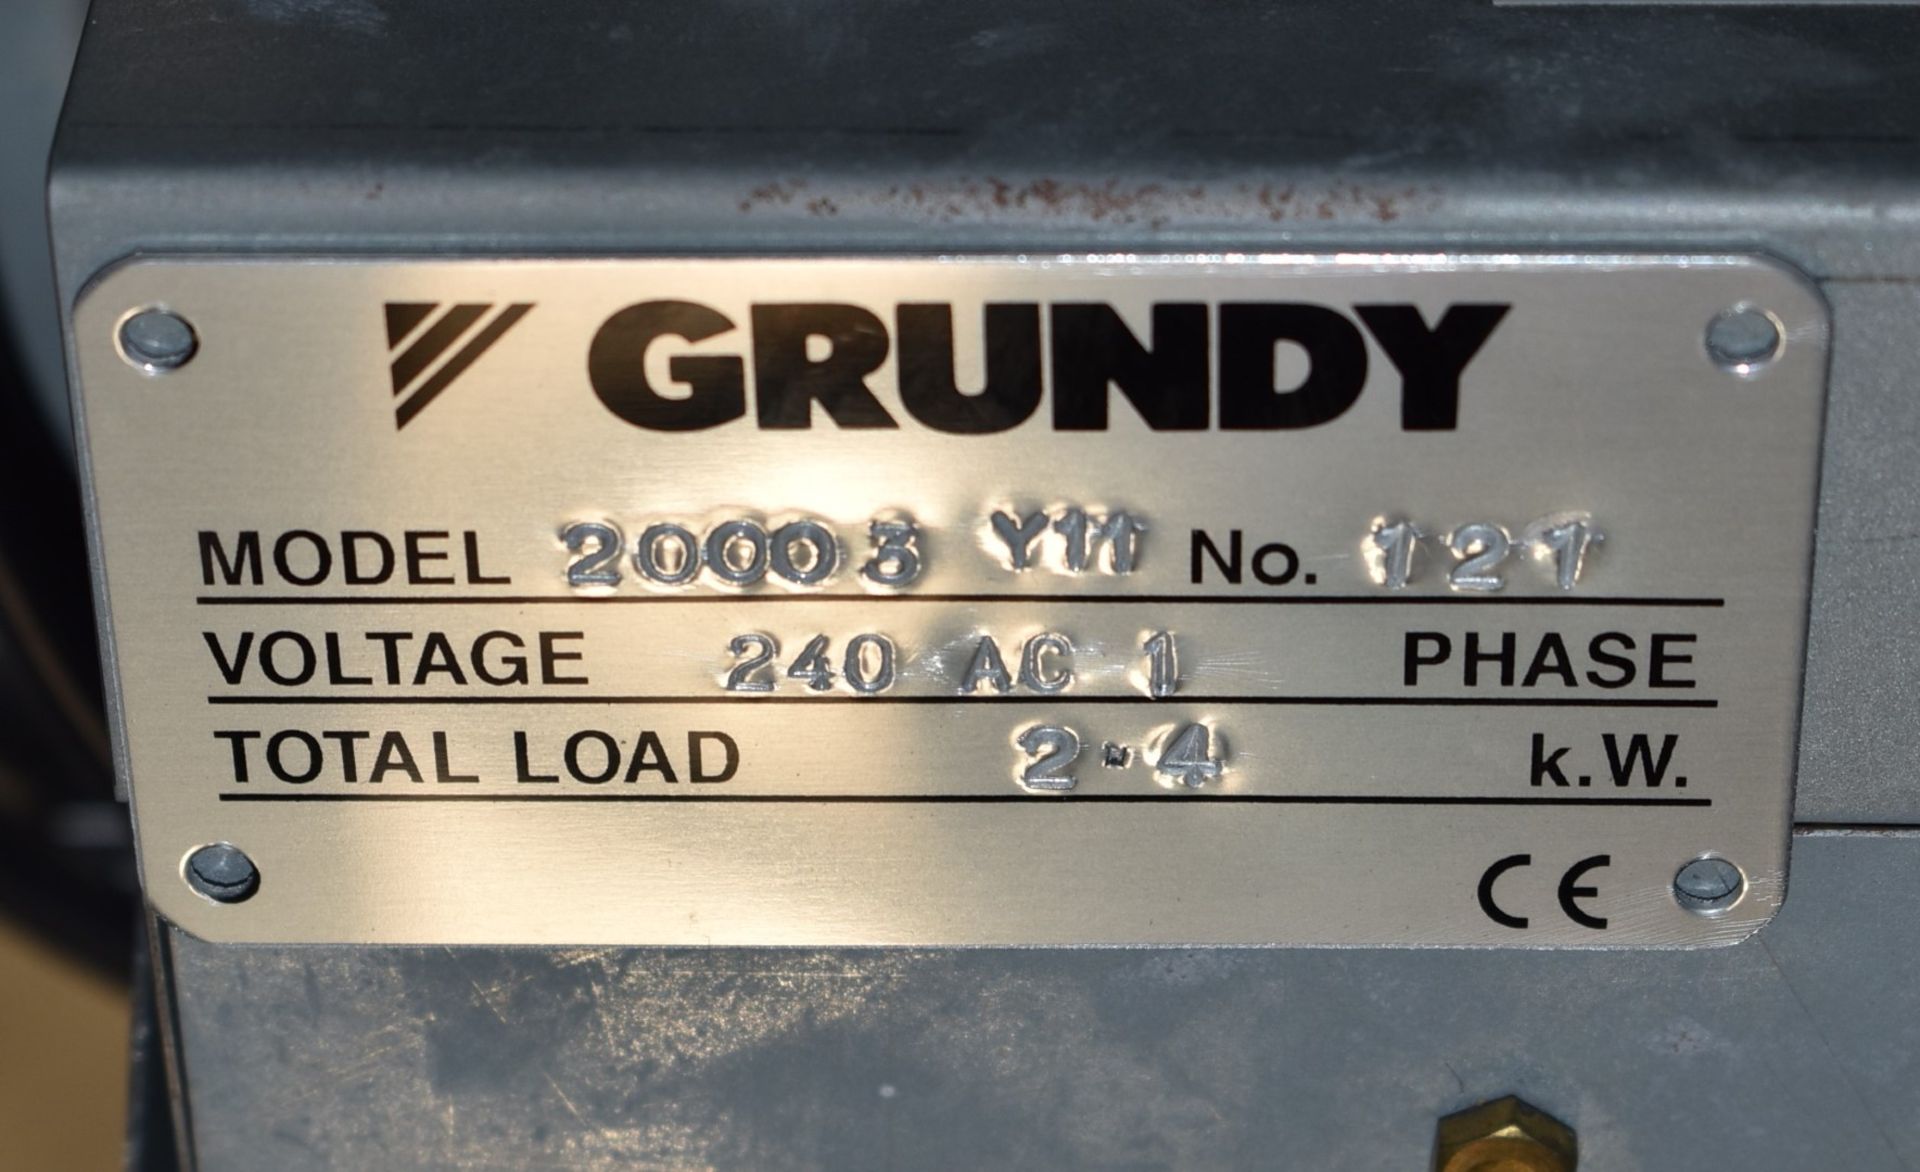 1 x Grundy Drop In Baine Marie Unit With Overhead Warming Light and Control Panel - Model 20003 - Image 17 of 19